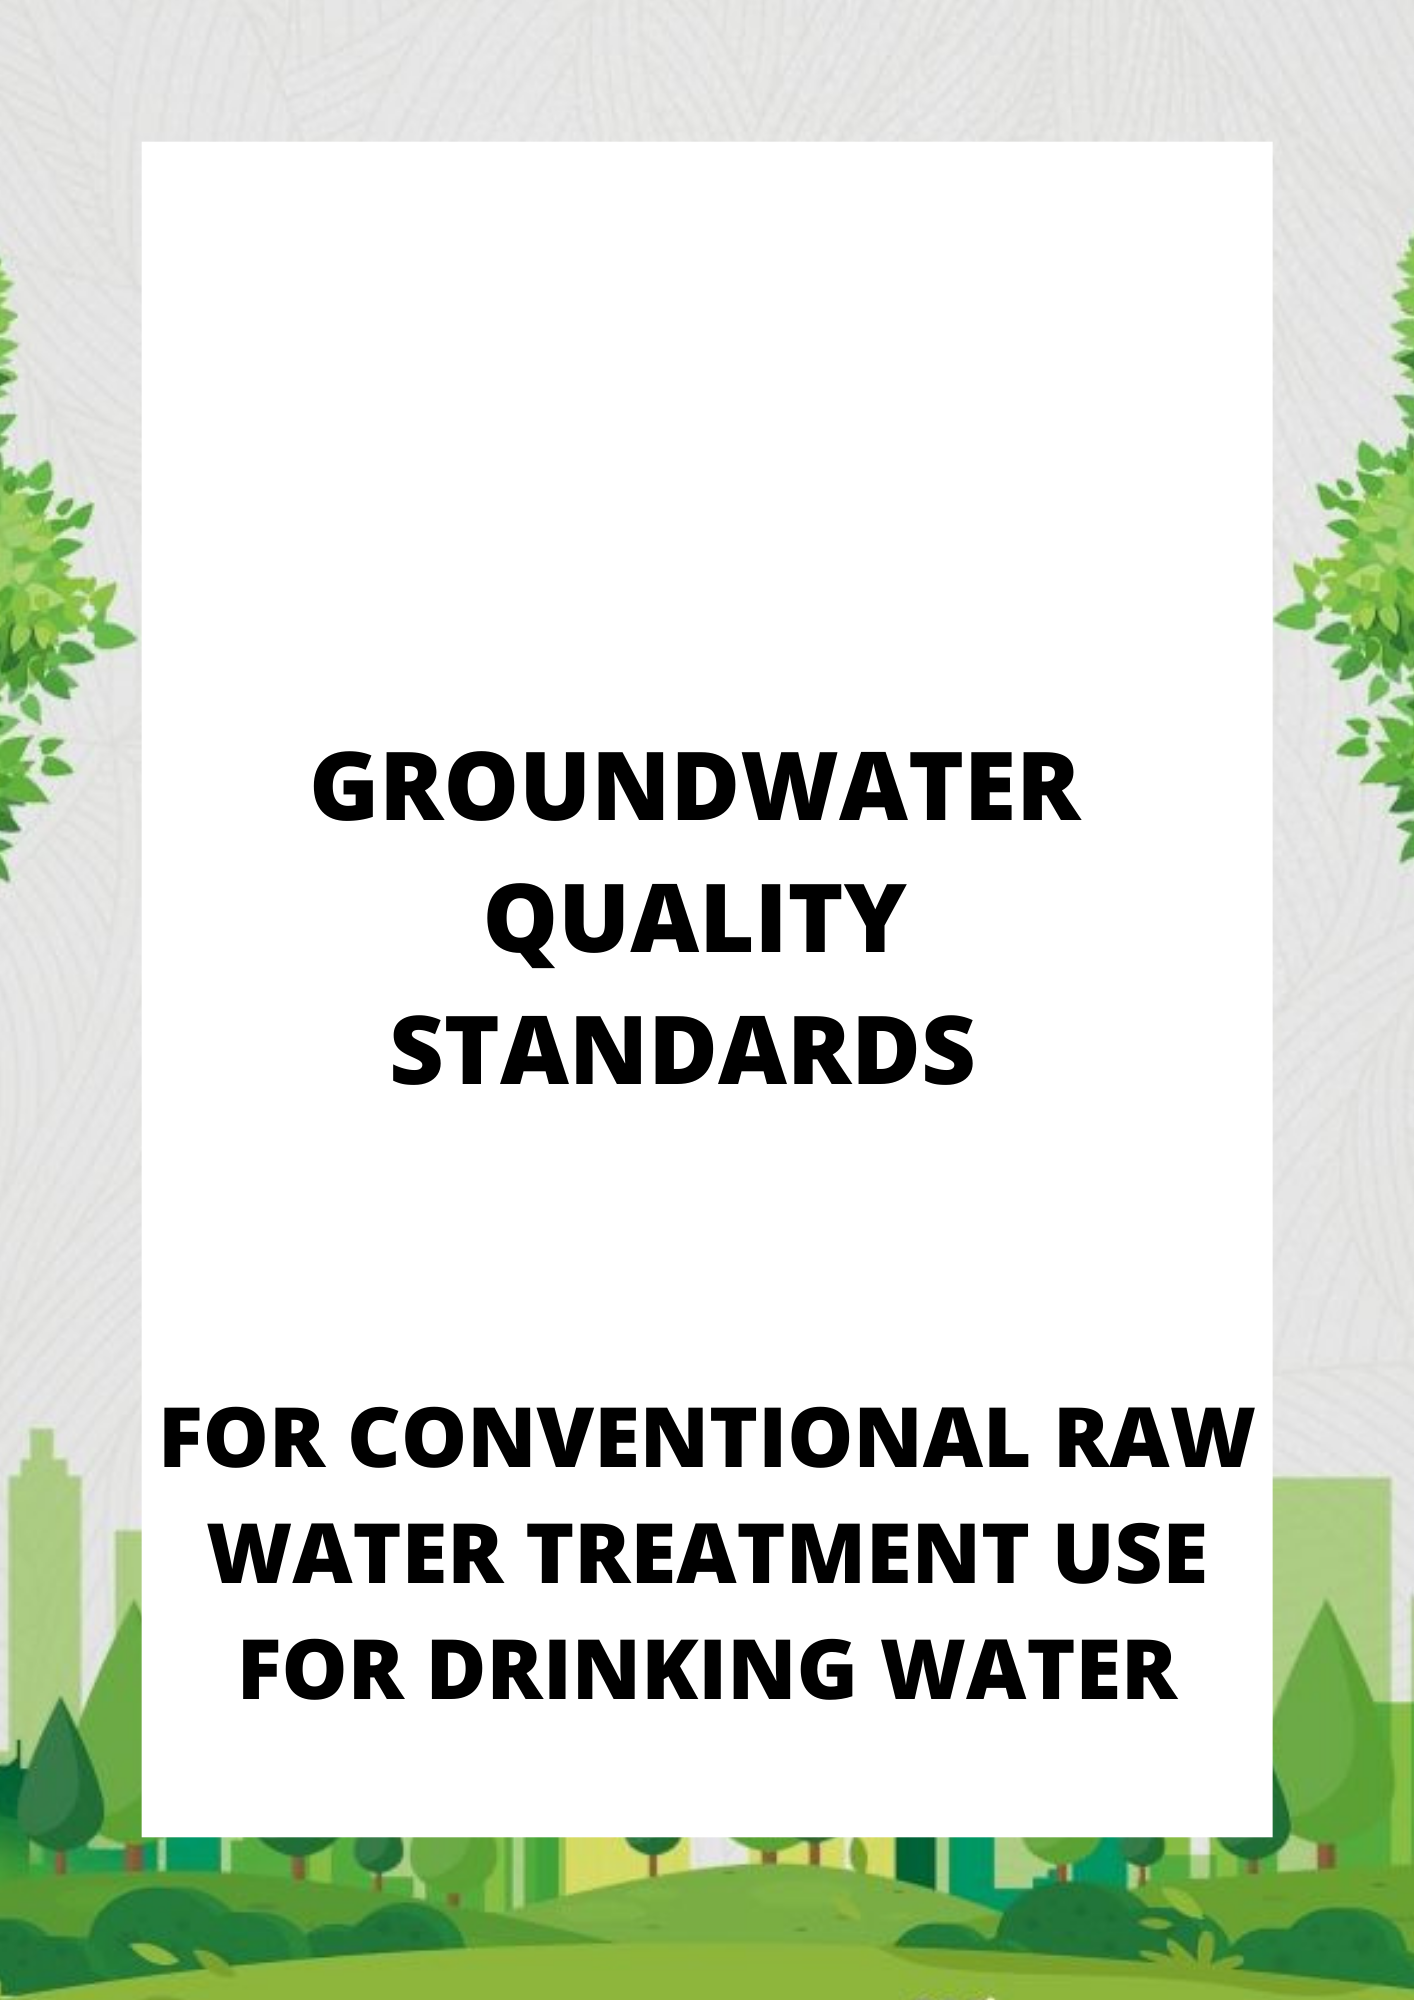 GROUNDWATER QUALITY STANDARDS - FOR CONVENTIONAL RAW WATER TREATMENT USE FOR DRINKING WATER